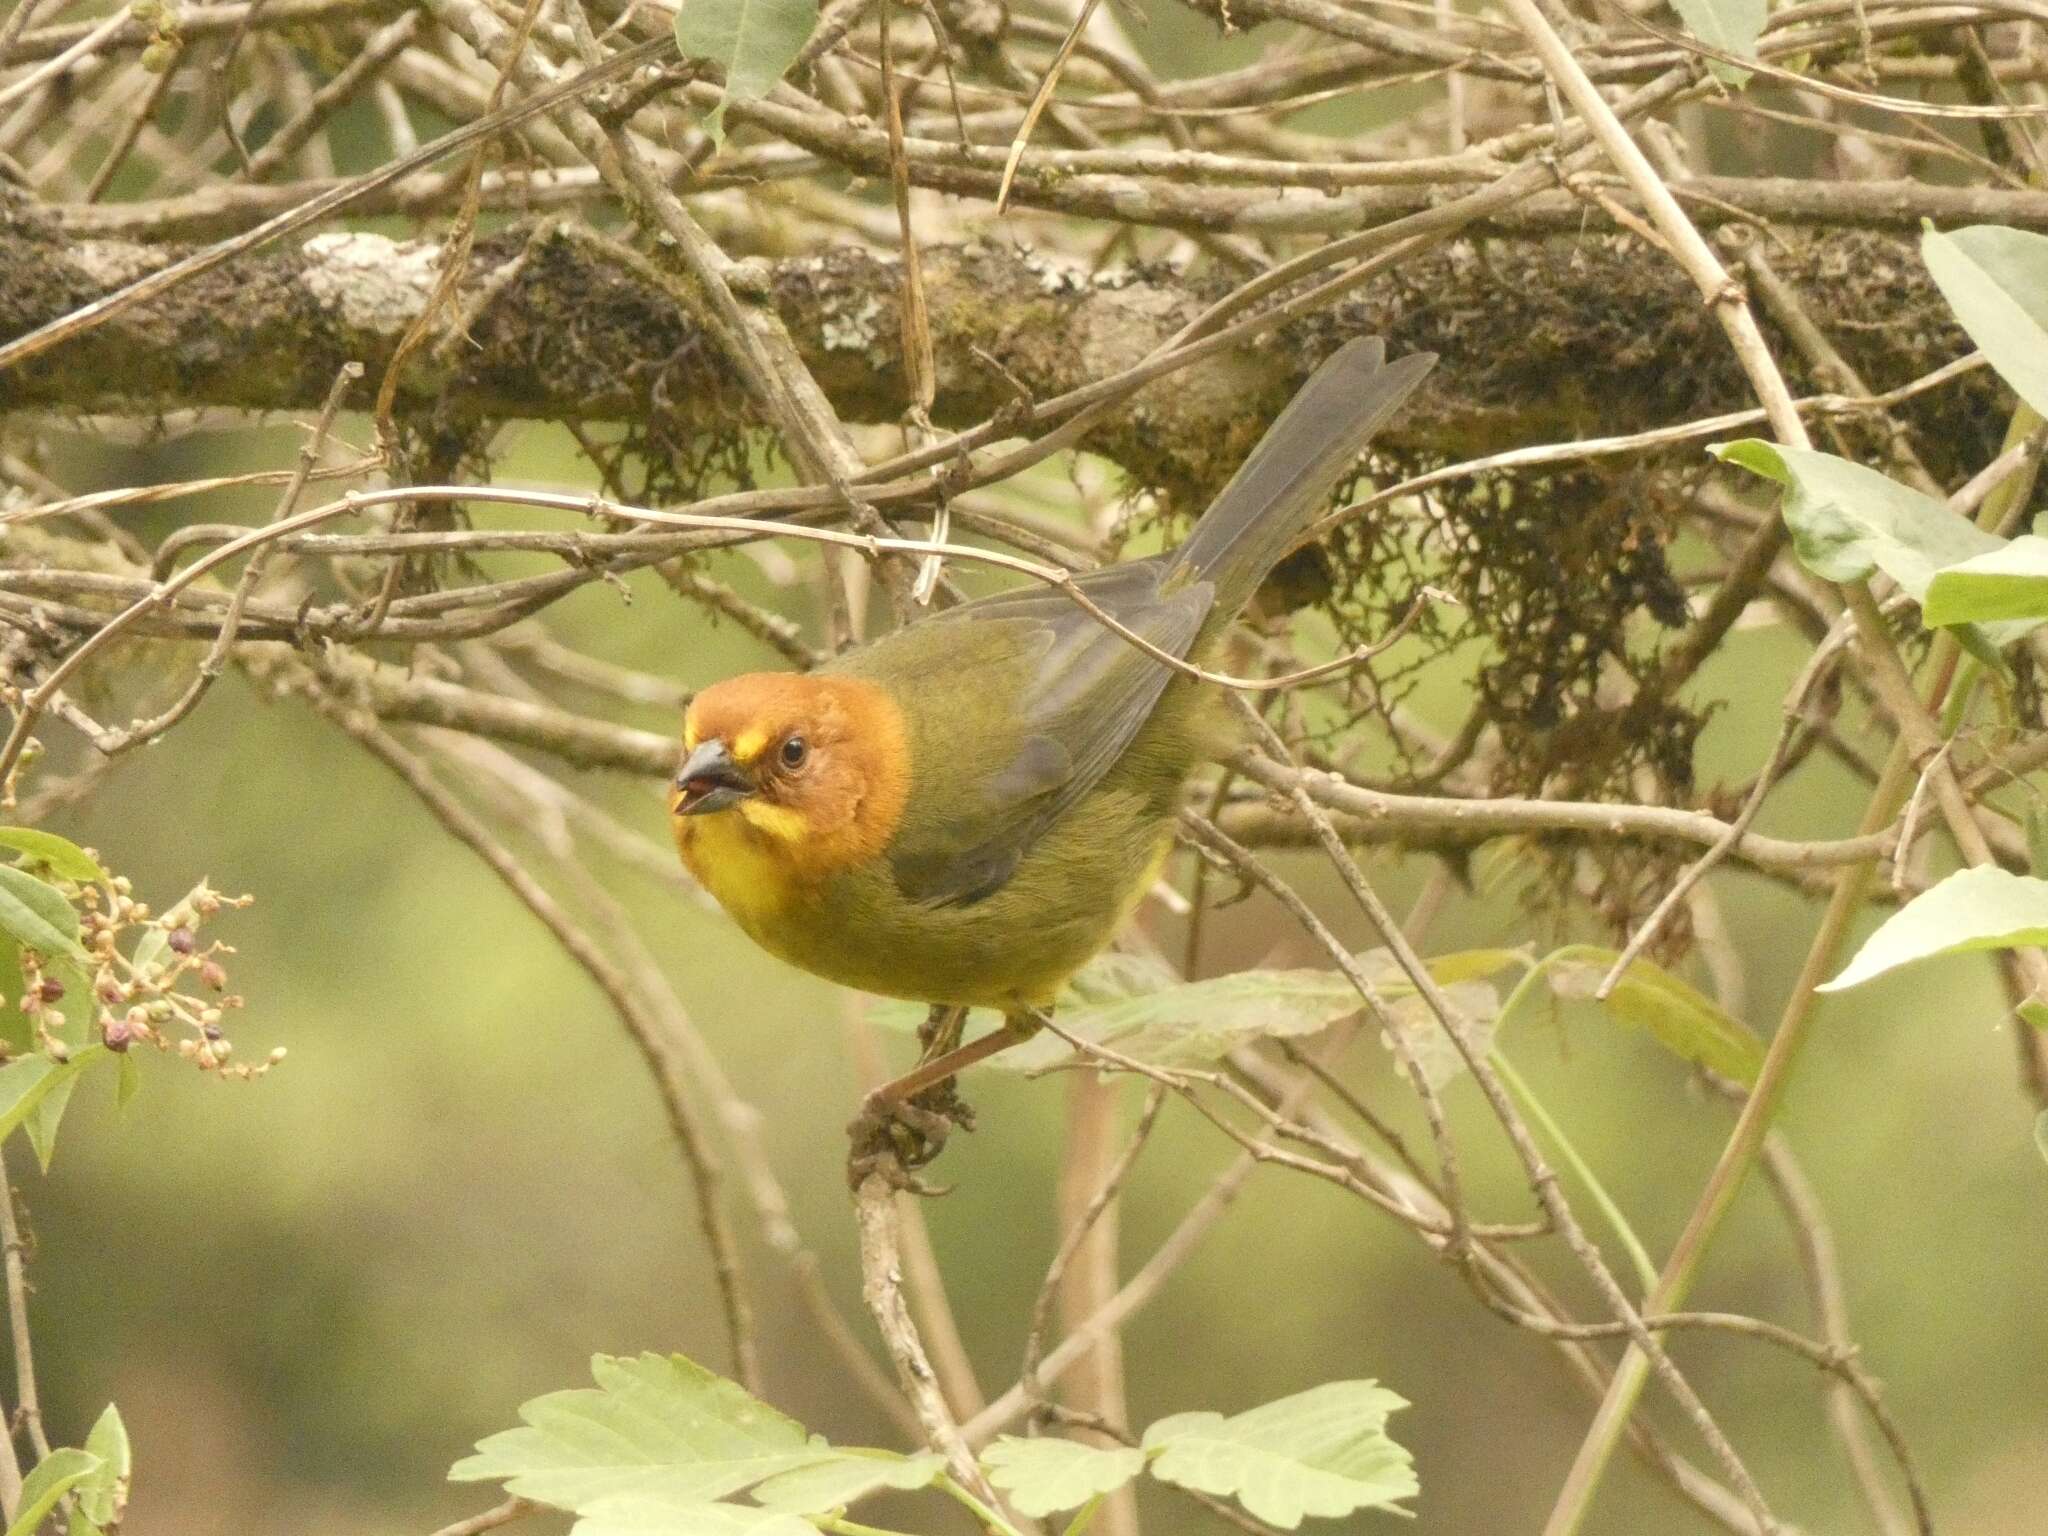 Image of Fulvous-headed Brush Finch